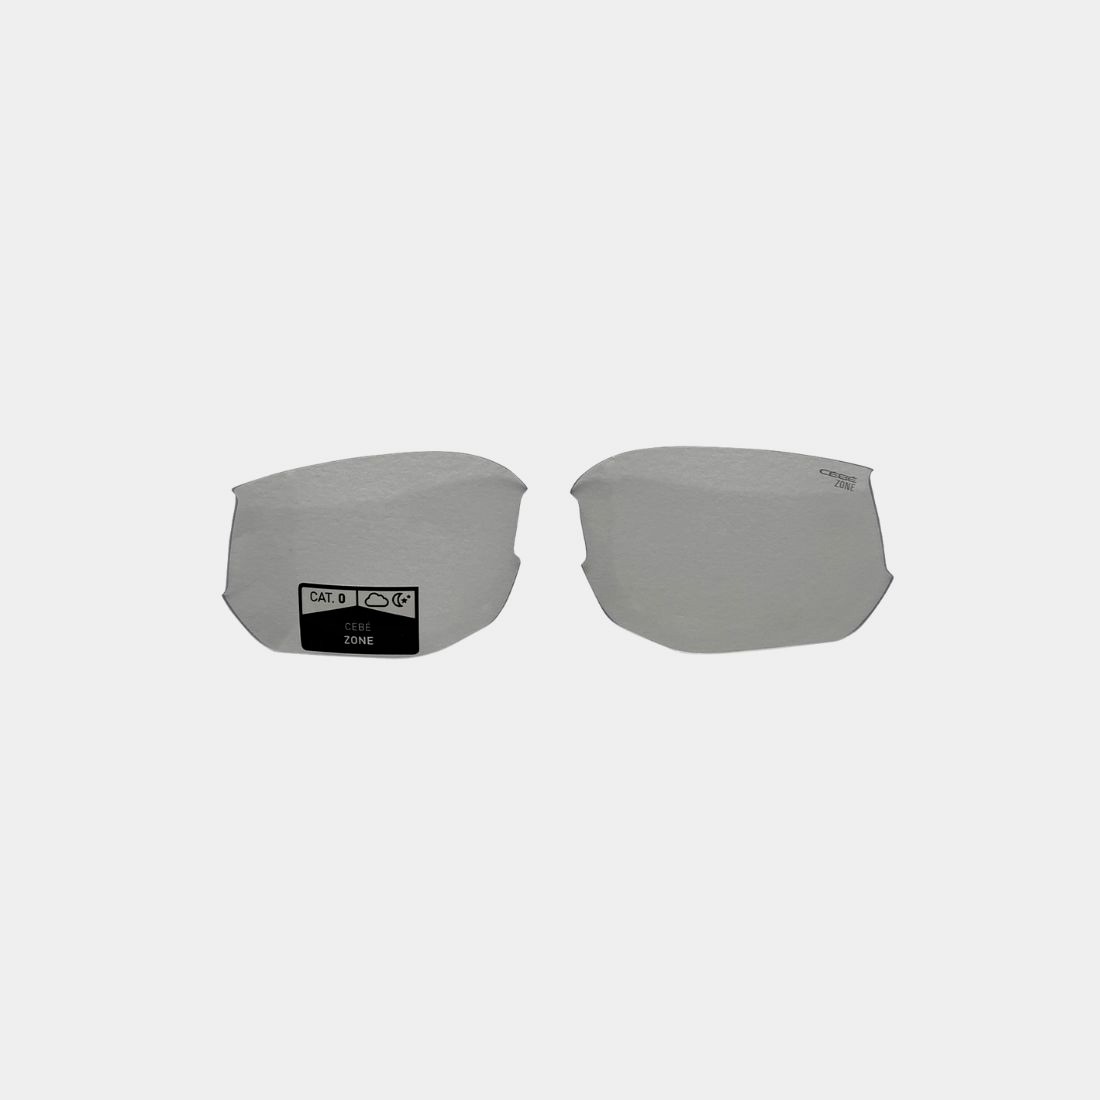 S'TRACK L 2.0 - REPLACEMENT LENSES